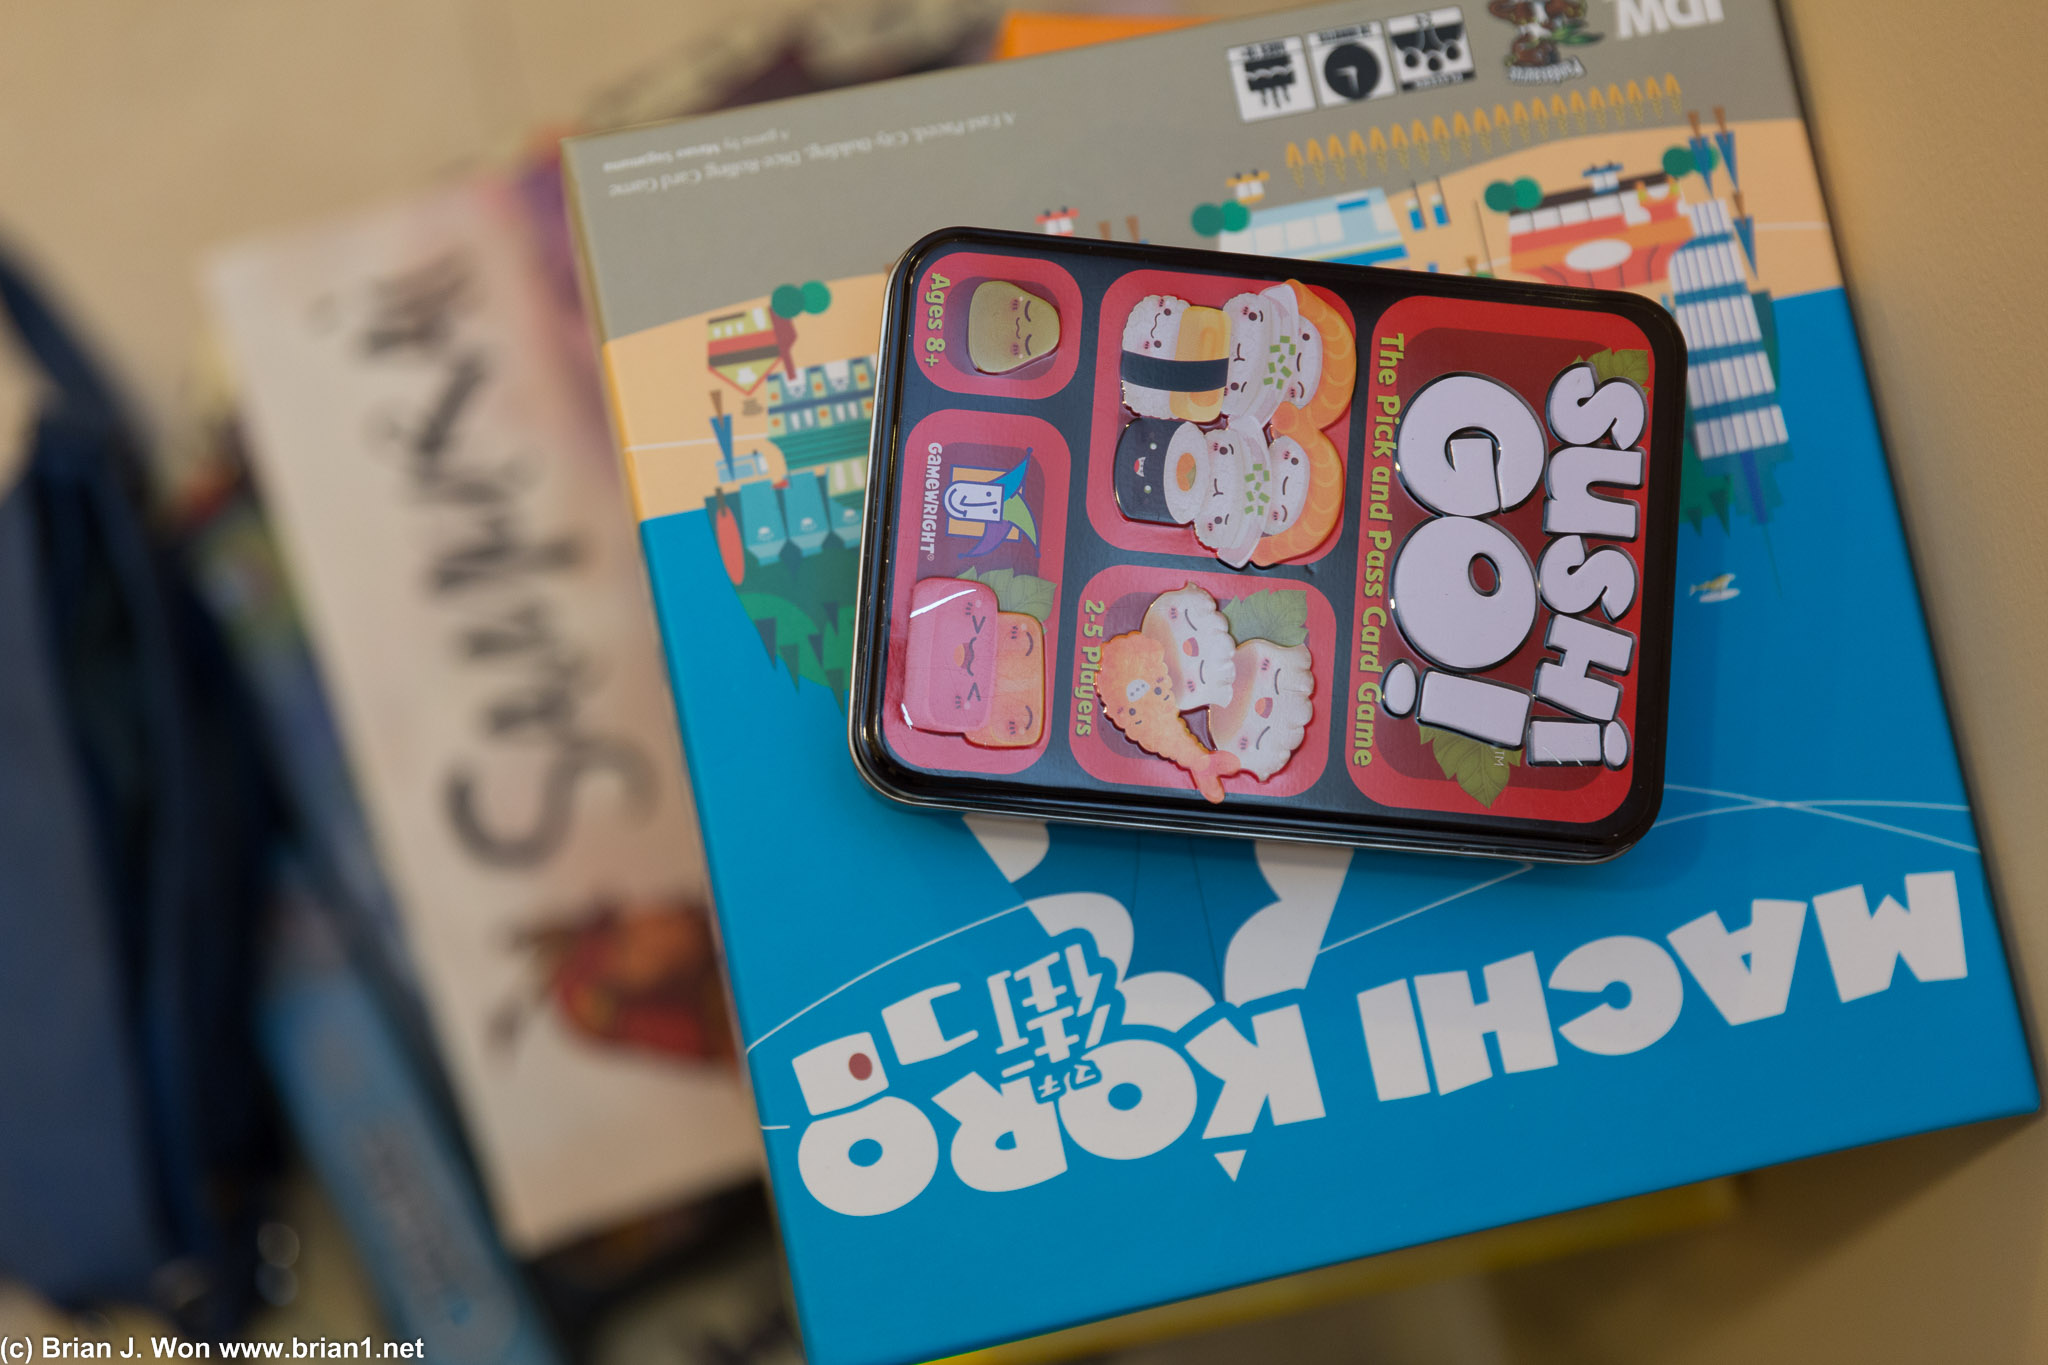 Sushi Go and Machi Koro top the stacks of board games.